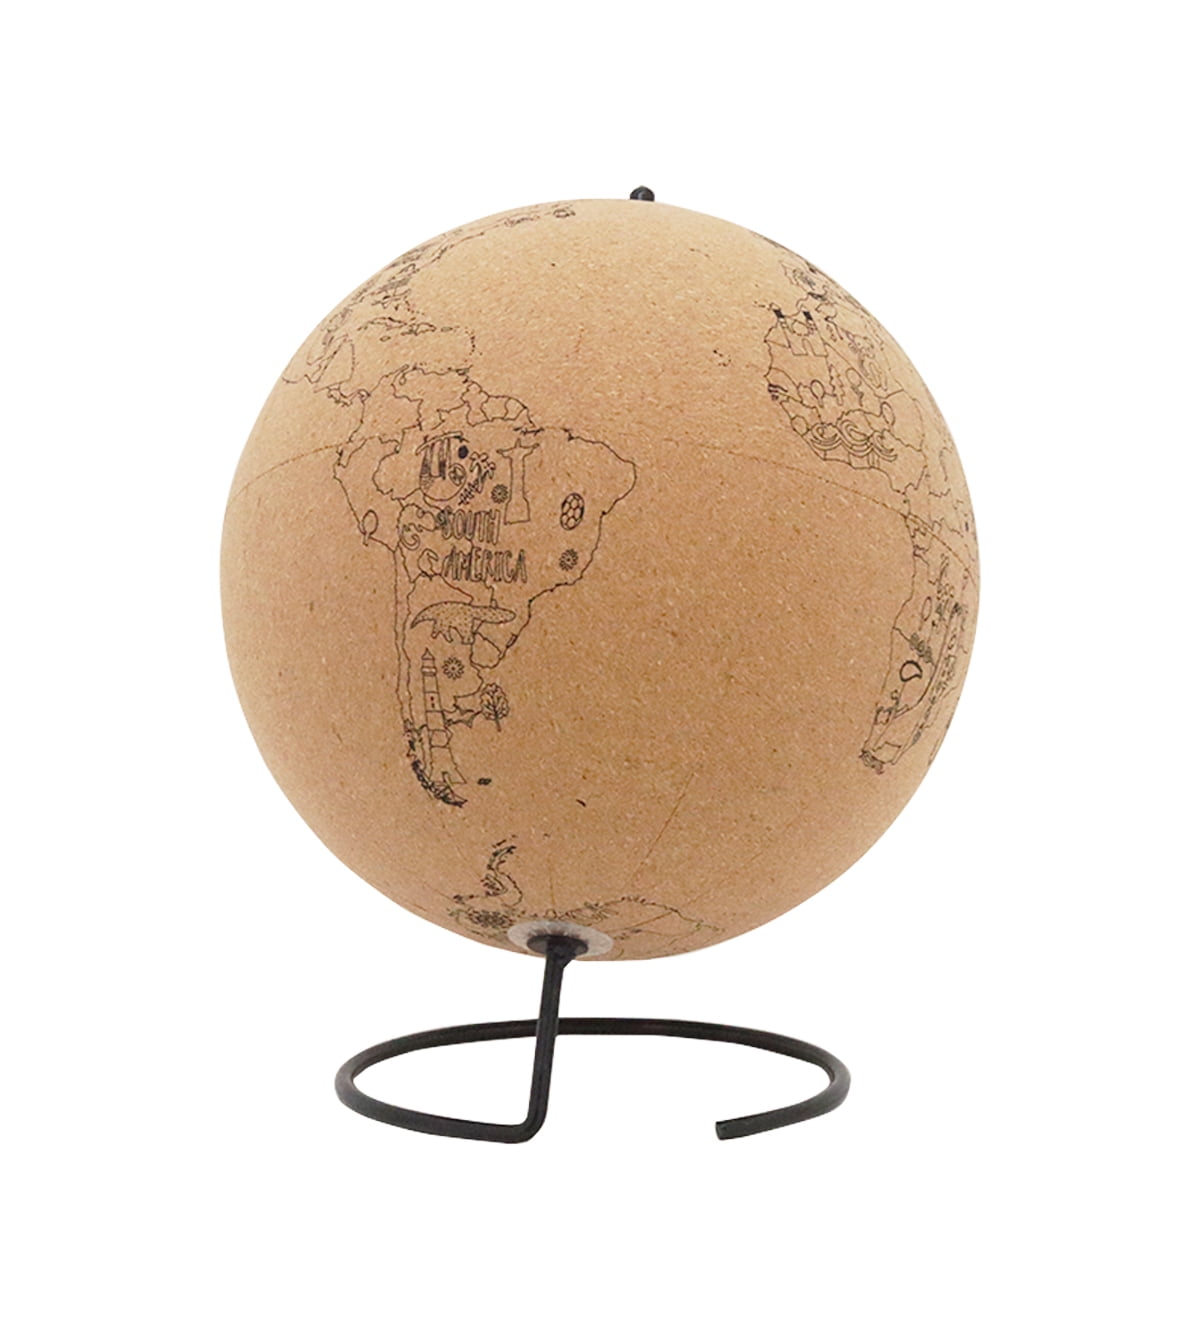 Including Wooden Stand for Family Decorative Figurine Fortune Telling Crystal Ball Wensltd Gift Clearance 30mm